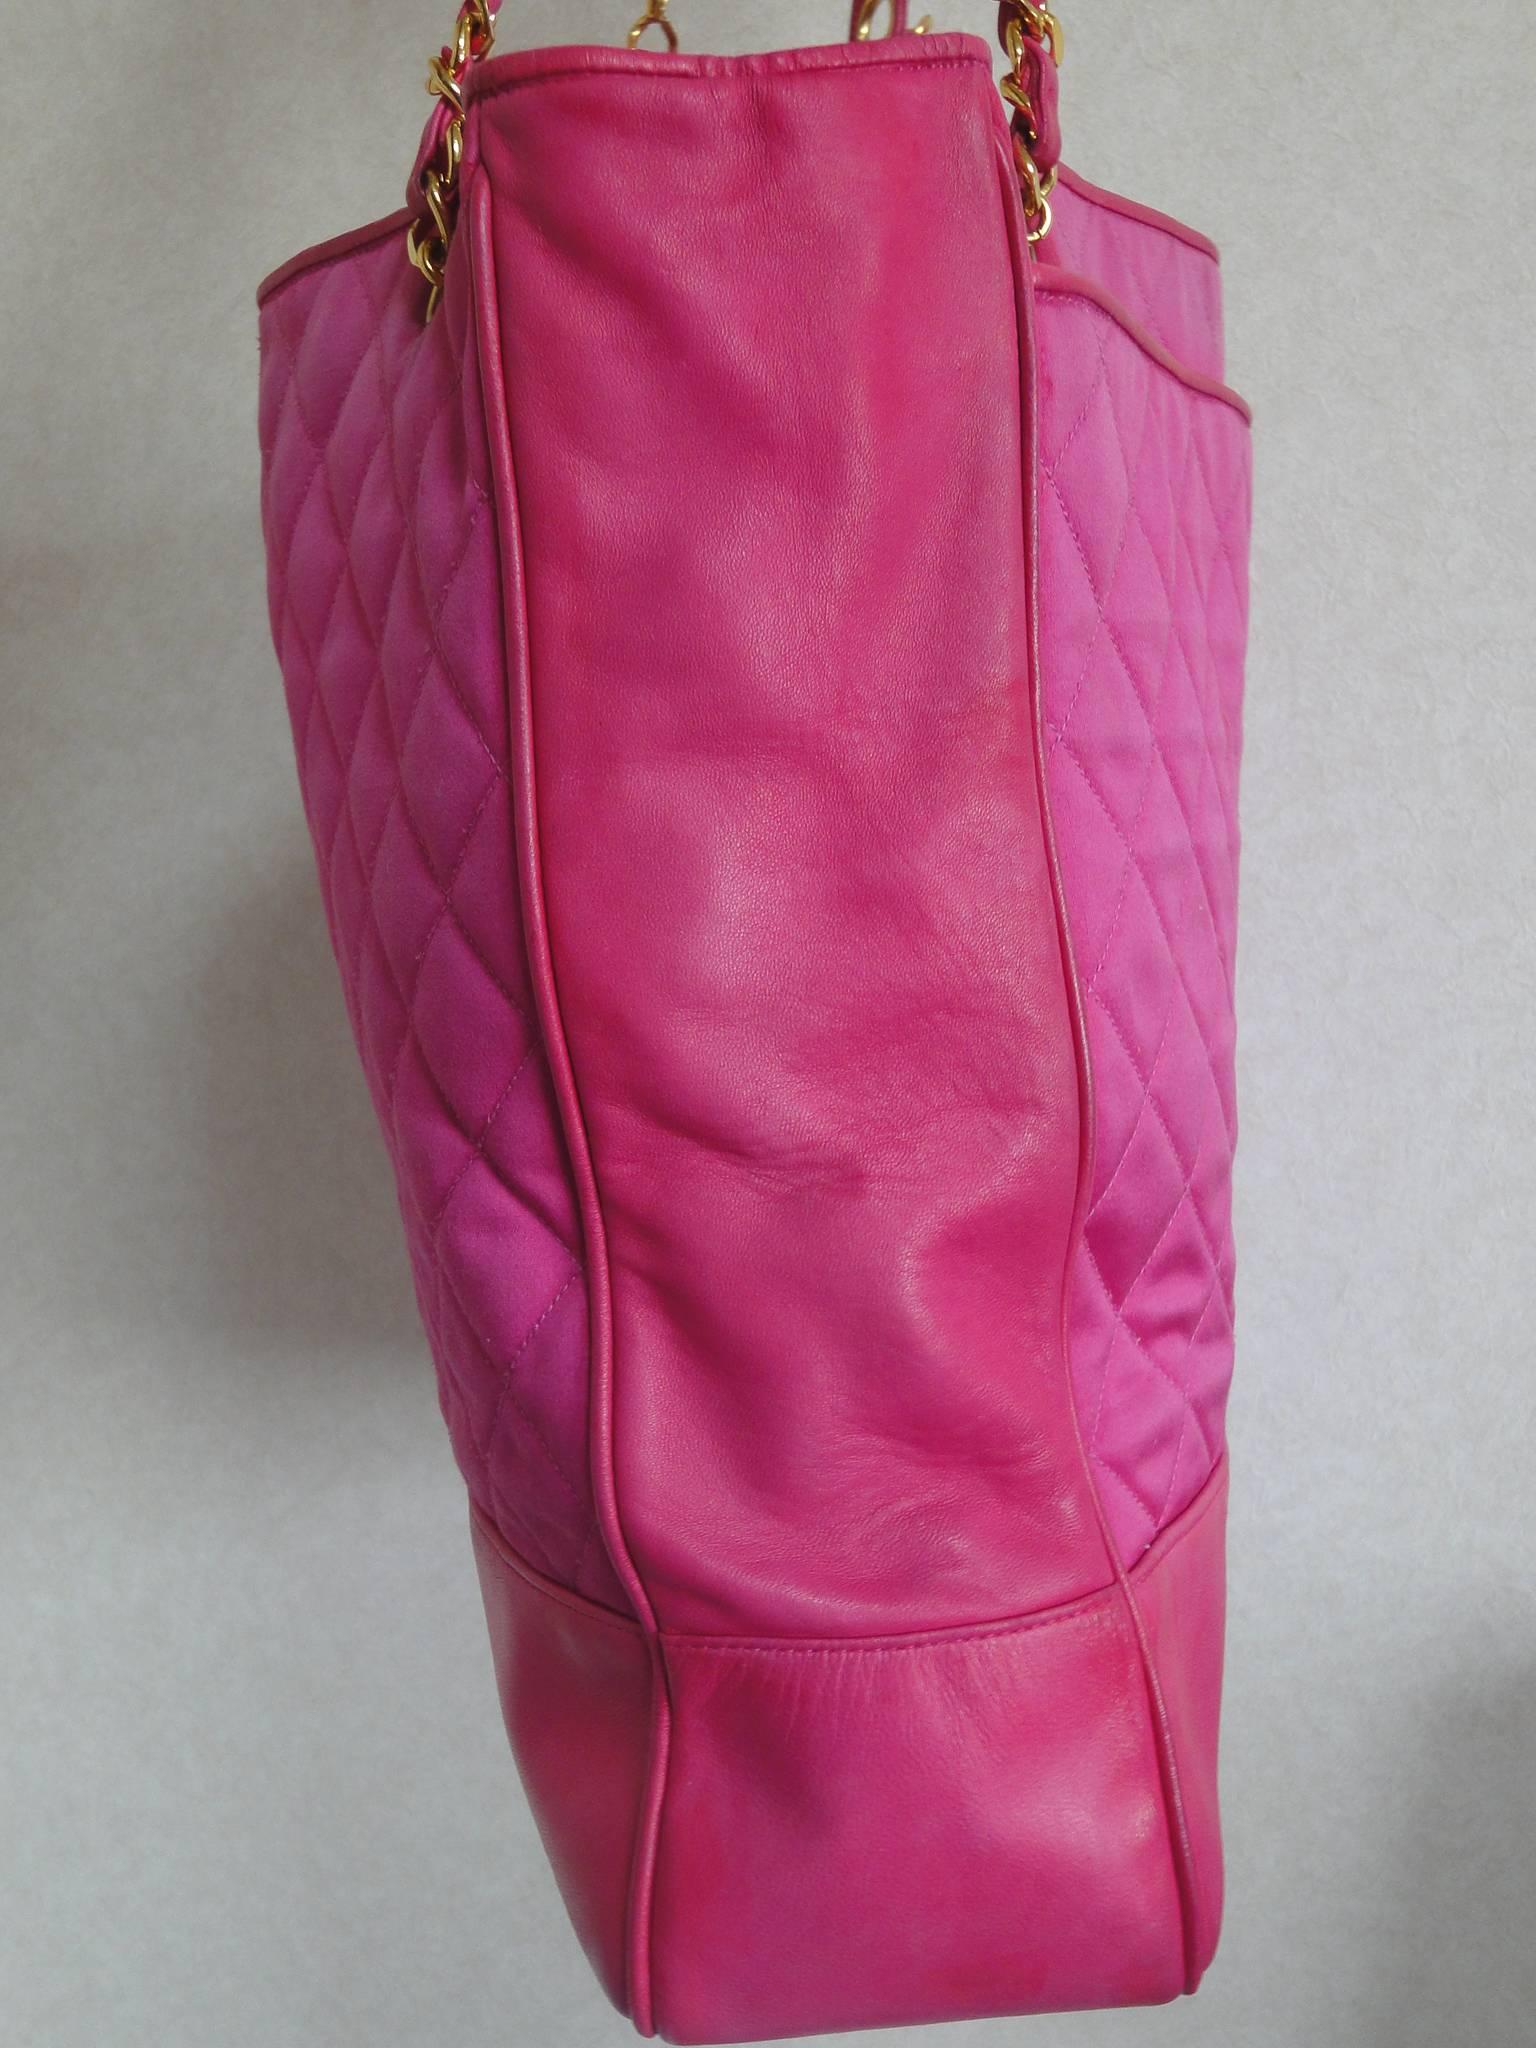 Vintage CHANEL bright pink shoulder tote bag with quilted satin and leather 1